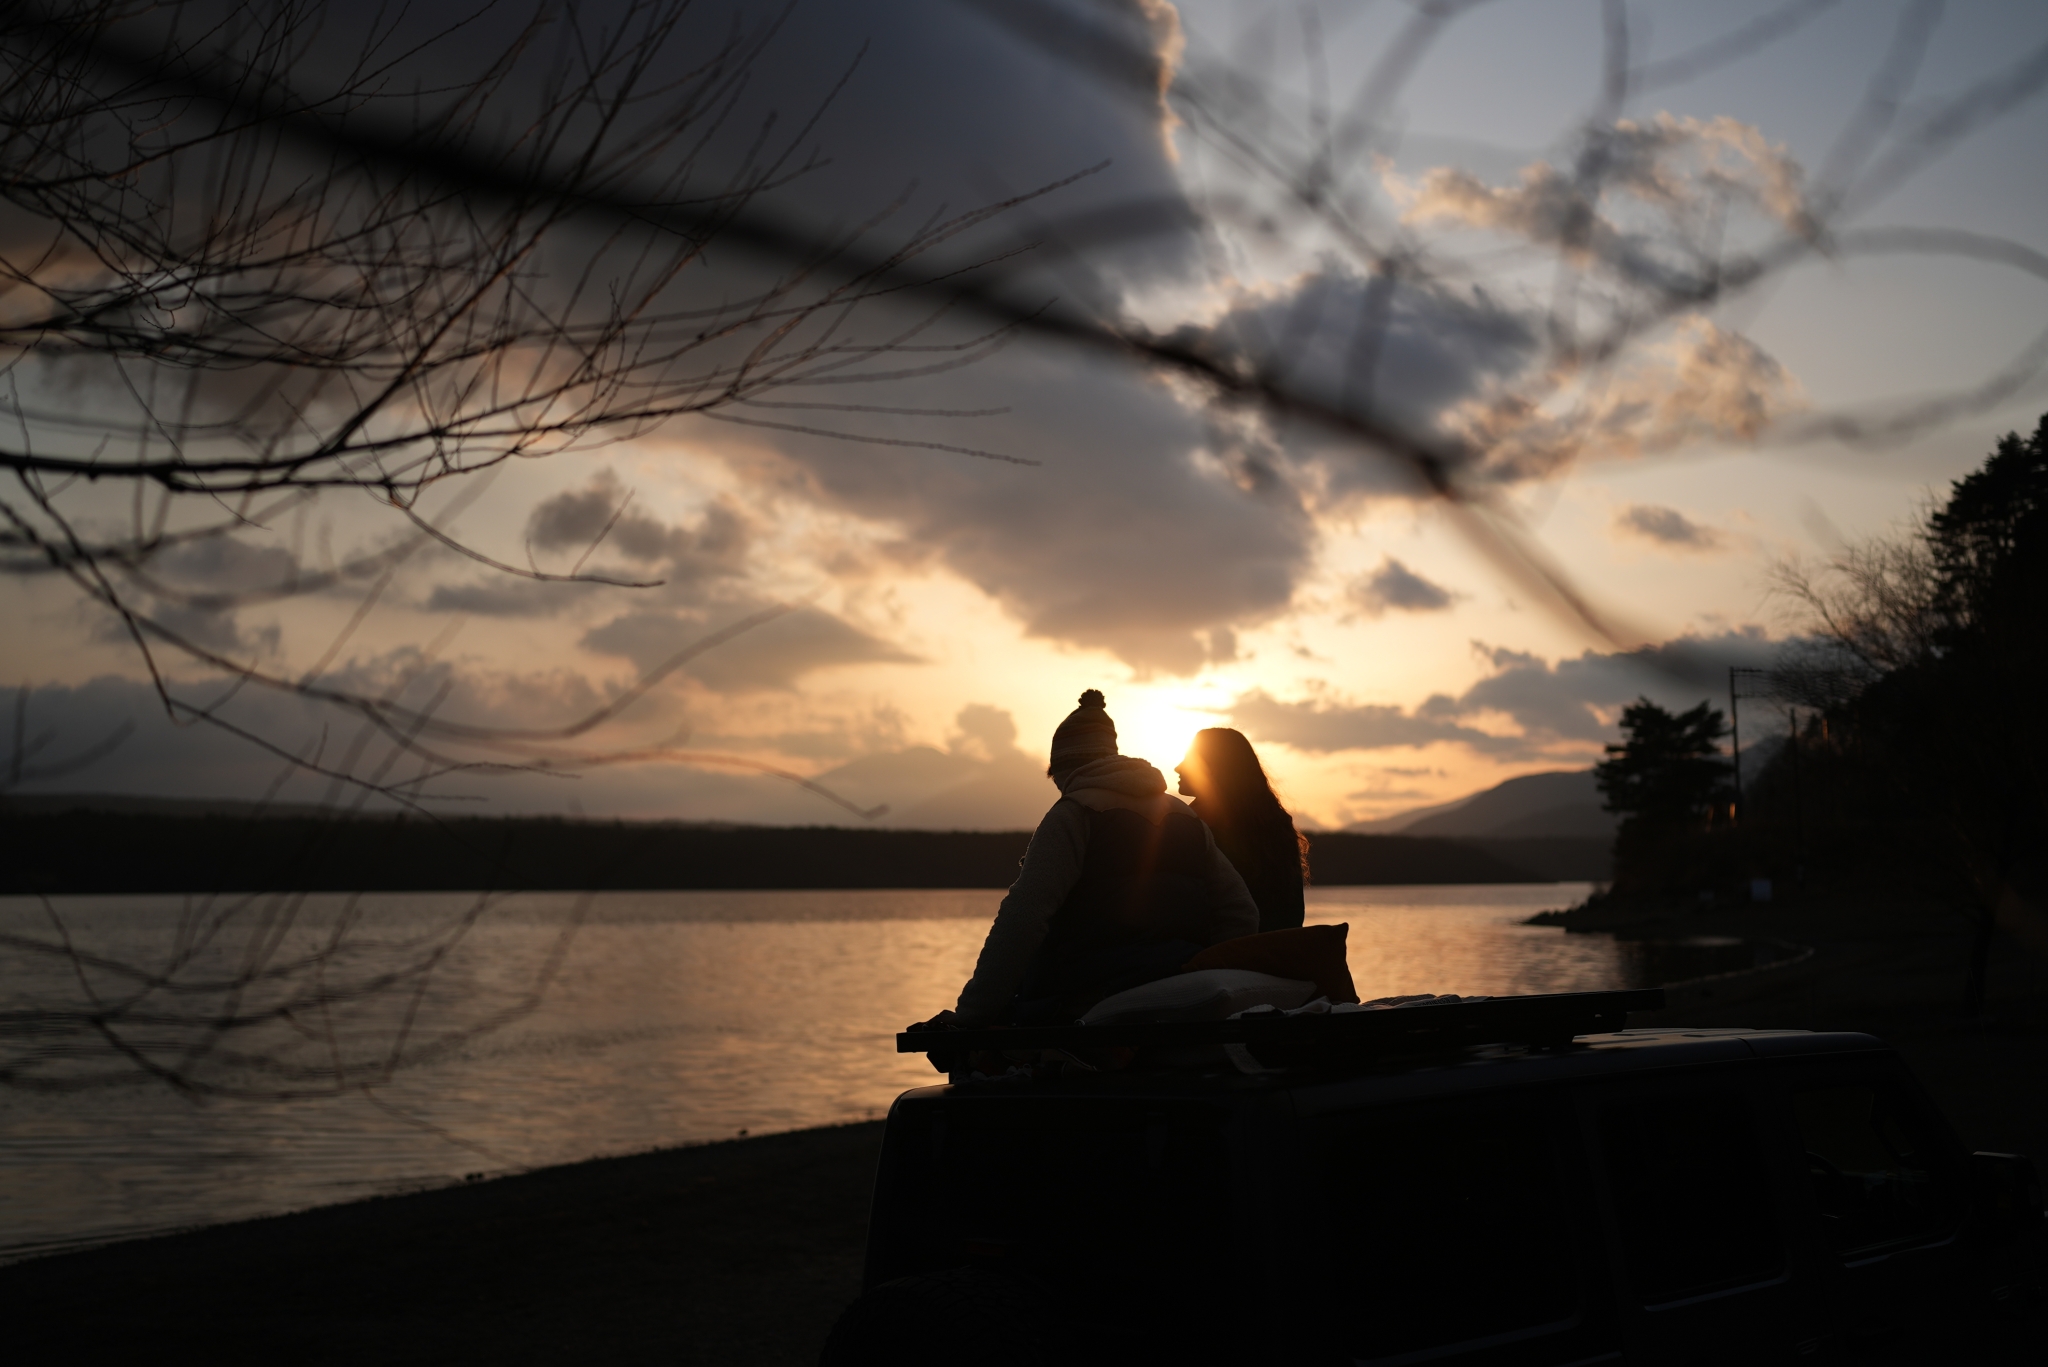 A couple sat by a lake, silhouetted against the setting sun